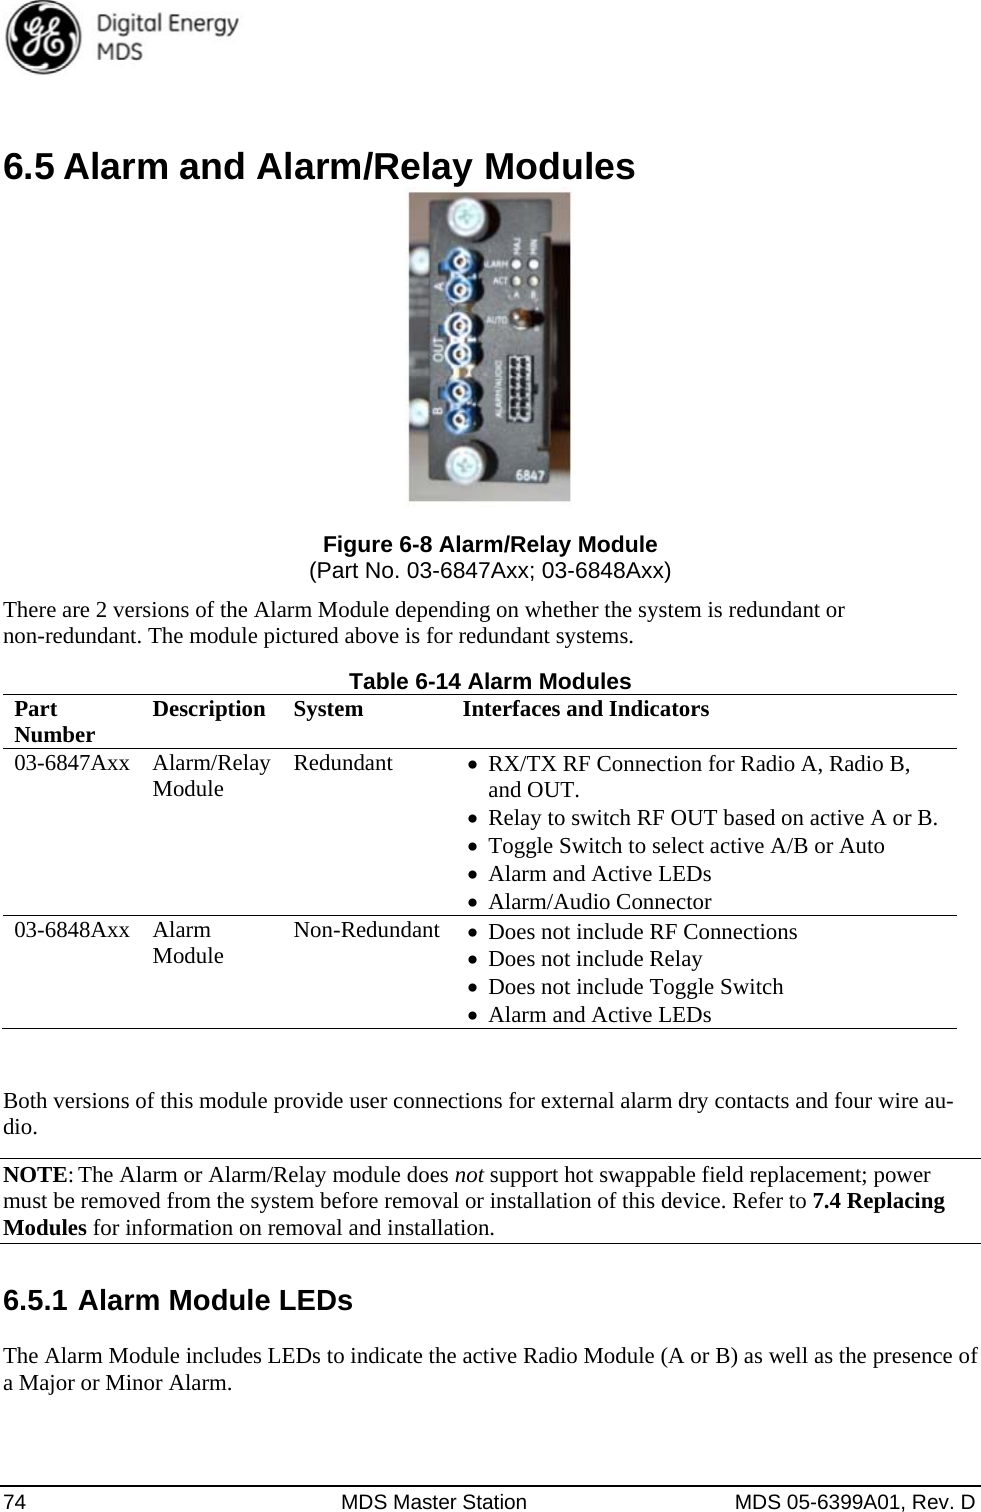  74  MDS Master Station  MDS 05-6399A01, Rev. D  6.5 Alarm and Alarm/Relay Modules  Figure 6-8 Alarm/Relay Module (Part No. 03-6847Axx; 03-6848Axx) There are 2 versions of the Alarm Module depending on whether the system is redundant or non-redundant. The module pictured above is for redundant systems. Table 6-14 Alarm Modules Part  Number  Description  System  Interfaces and Indicators 03-6847Axx Alarm/Relay Module  Redundant  RX/TX RF Connection for Radio A, Radio B, and OUT.    Relay to switch RF OUT based on active A or B.  Toggle Switch to select active A/B or Auto  Alarm and Active LEDs  Alarm/Audio Connector 03-6848Axx Alarm Module  Non-Redundant Does not include RF Connections  Does not include Relay  Does not include Toggle Switch  Alarm and Active LEDs  Both versions of this module provide user connections for external alarm dry contacts and four wire au-dio.  NOTE: The Alarm or Alarm/Relay module does not support hot swappable field replacement; power must be removed from the system before removal or installation of this device. Refer to 7.4 Replacing Modules for information on removal and installation. 6.5.1 Alarm Module LEDs  The Alarm Module includes LEDs to indicate the active Radio Module (A or B) as well as the presence of a Major or Minor Alarm.  